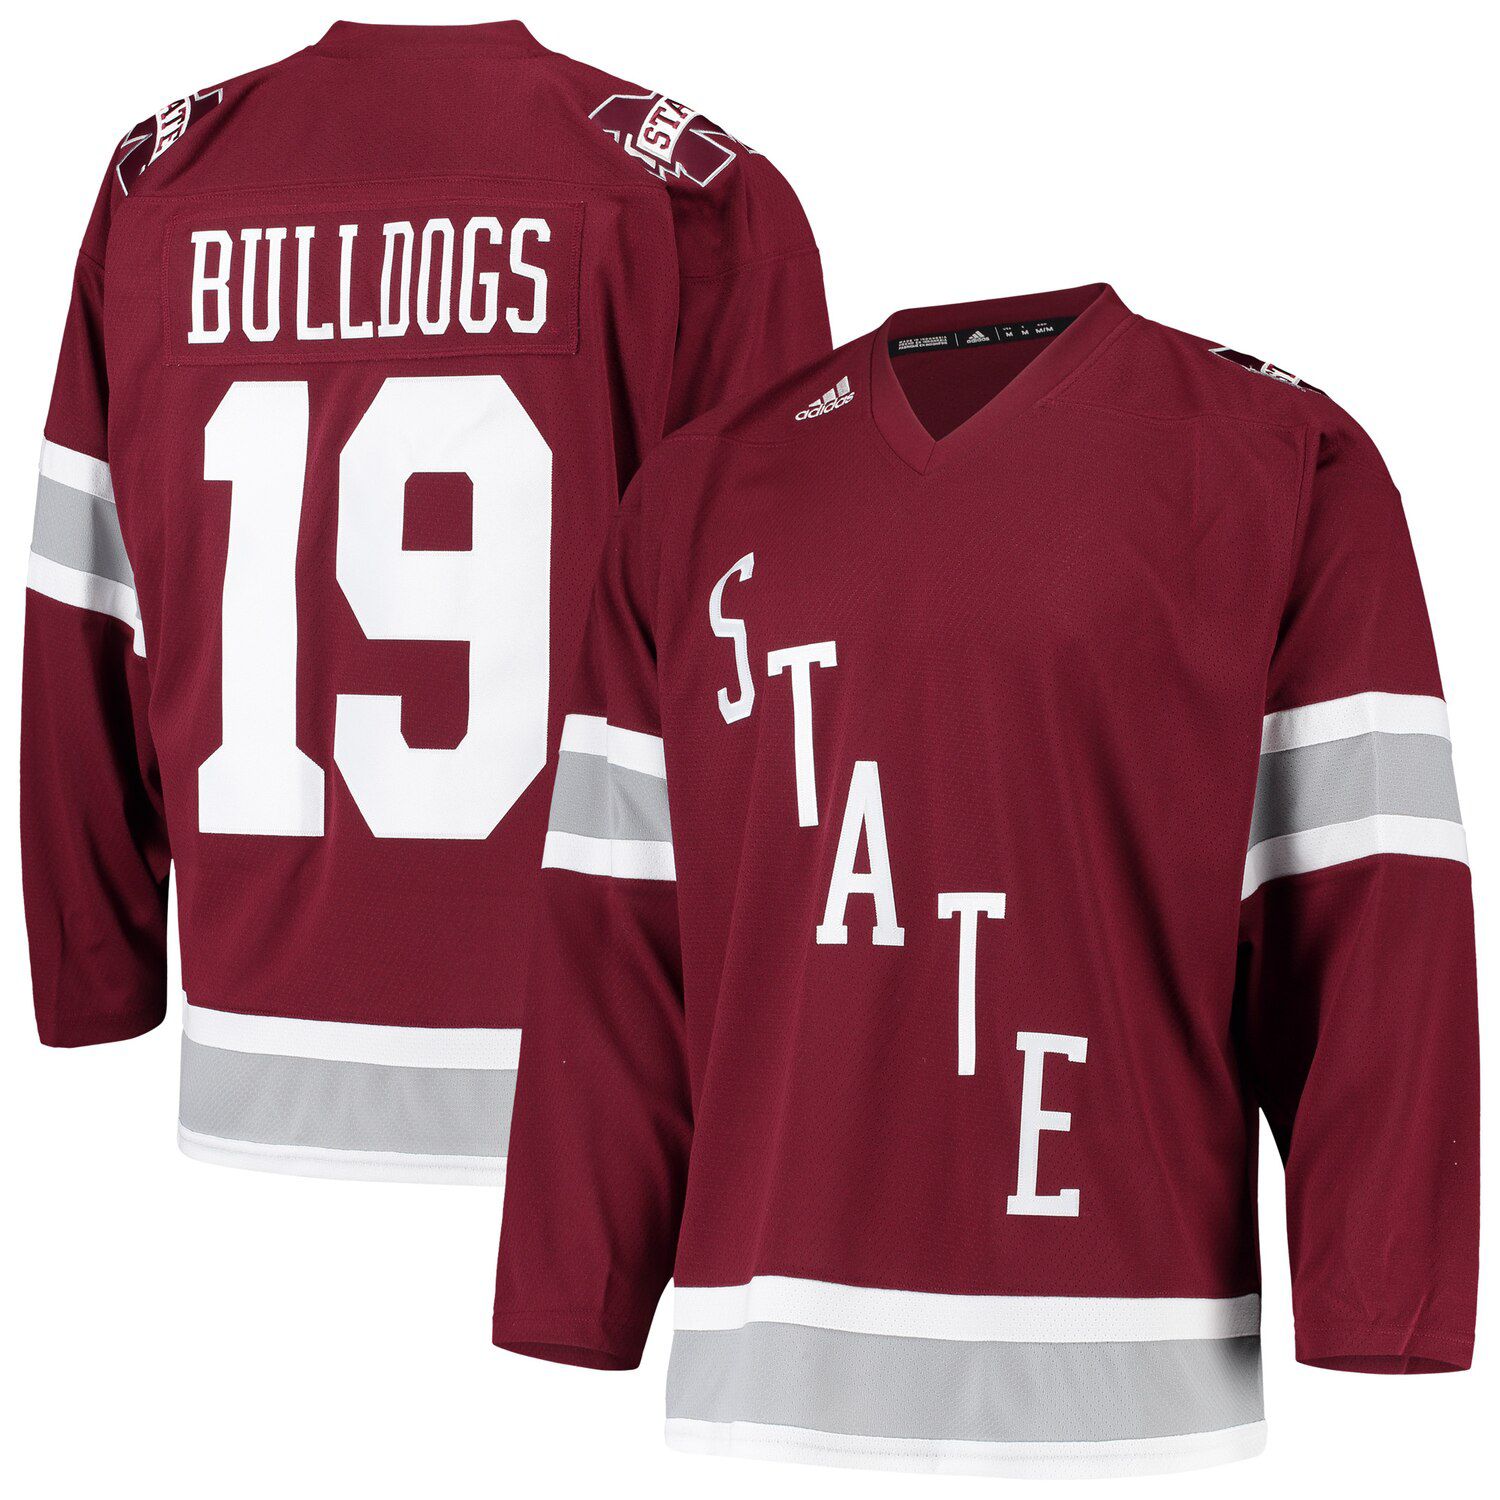 ms state jersey